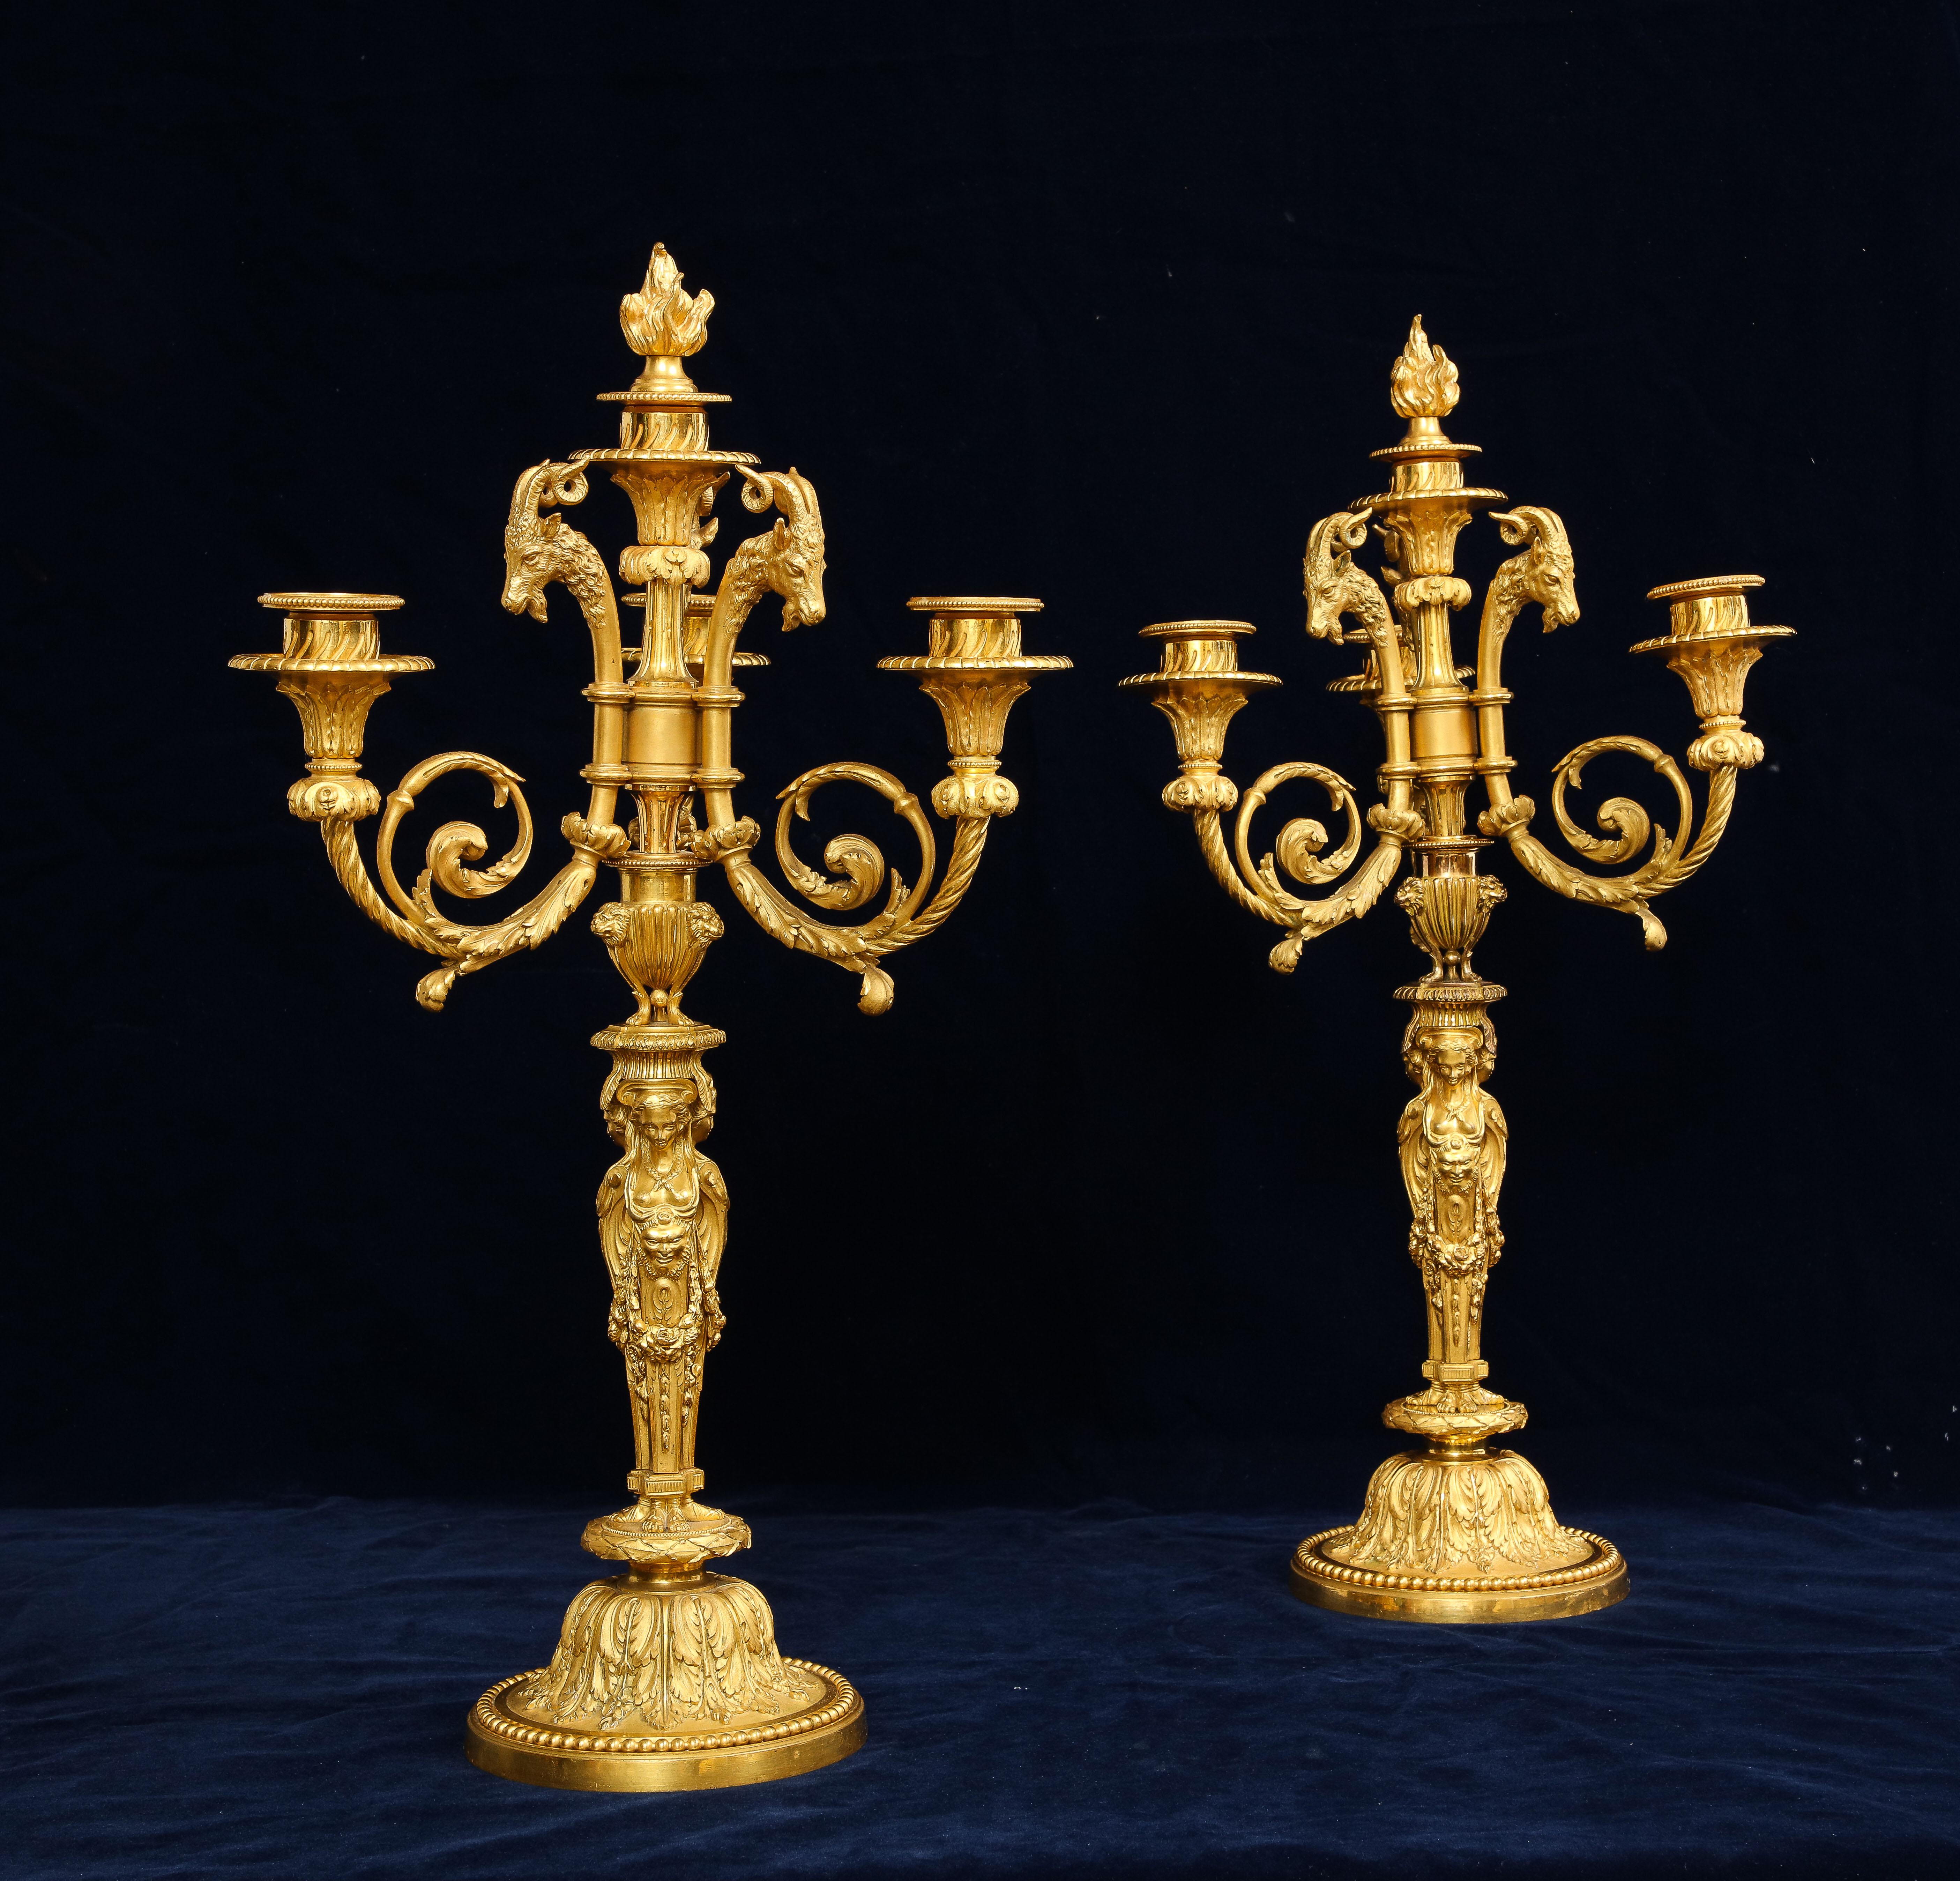 Pair of French 19th C. Ormolu Figural 4 Light Candelabras, After P. Gouthiere In Good Condition For Sale In New York, NY